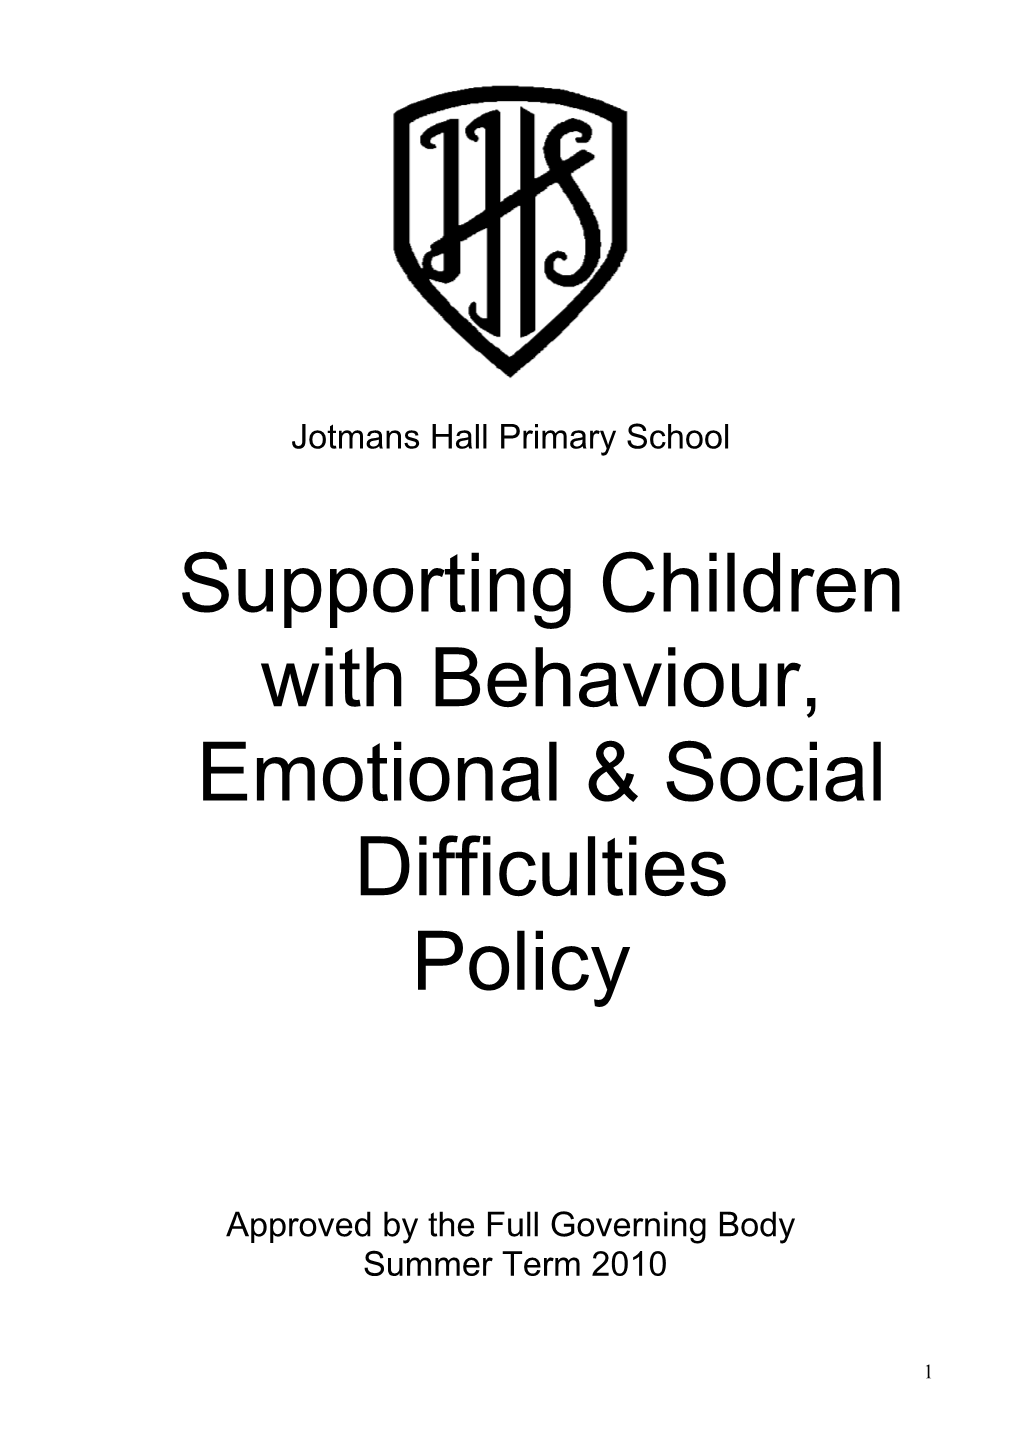 Supporting Children with Behaviour, Emotional and Social Difficulties